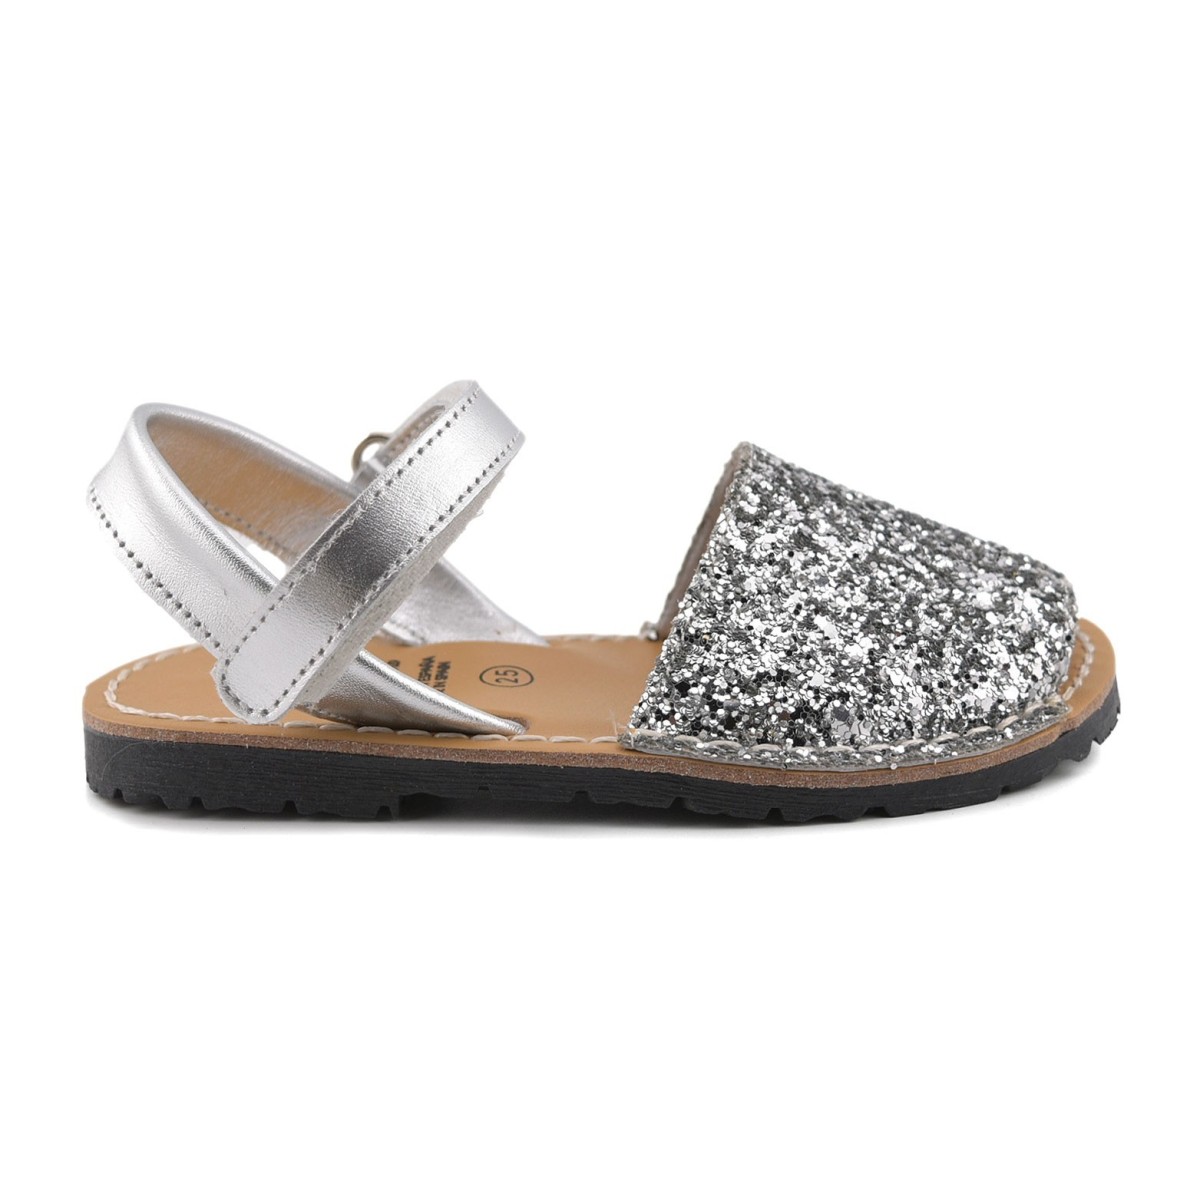 Menorquinas in silver leather and glitter by C. Ortuño